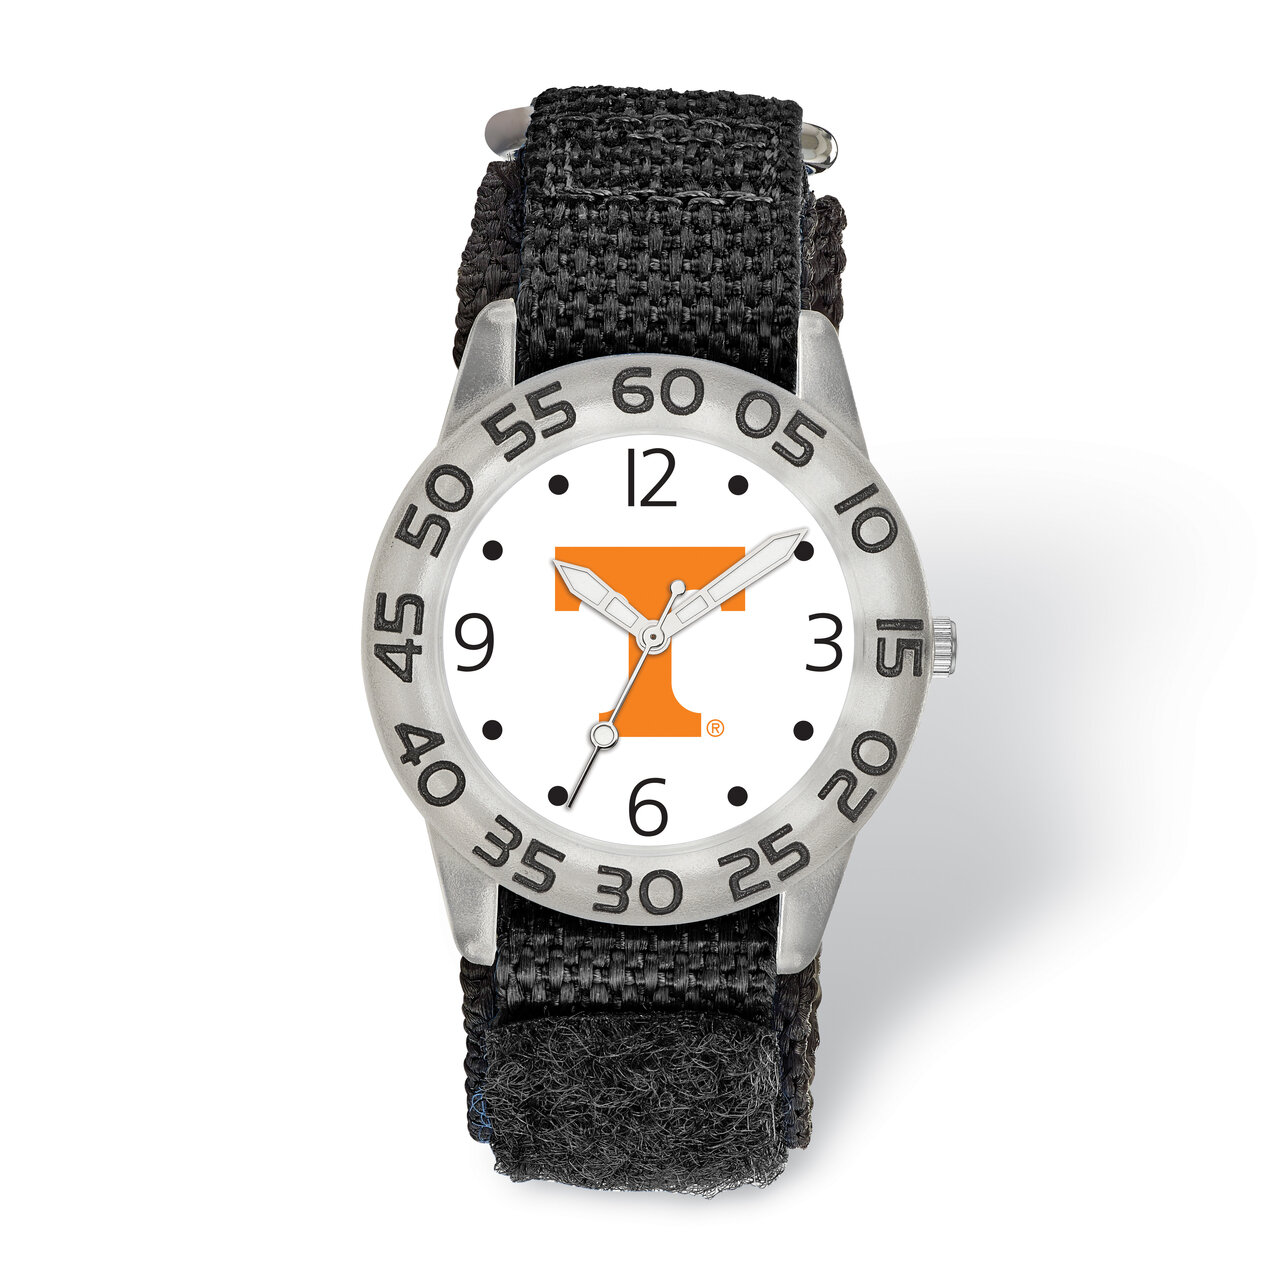 University of Tennessee Knoxville Childs Fan Watch UTN173